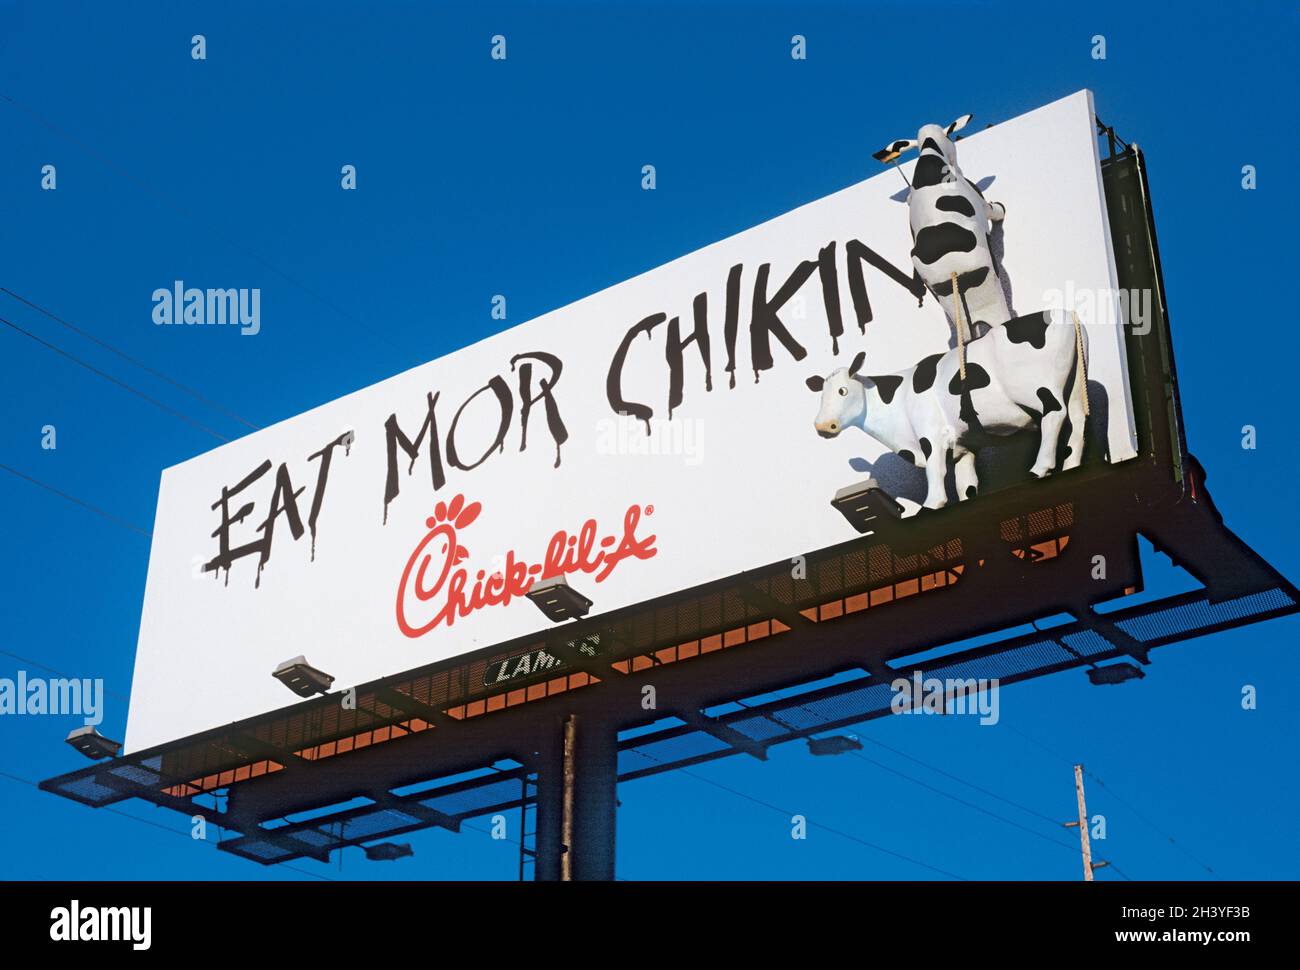 Chick-Fil-Abillboard Eat Mor Chikin with cows Stock Photo